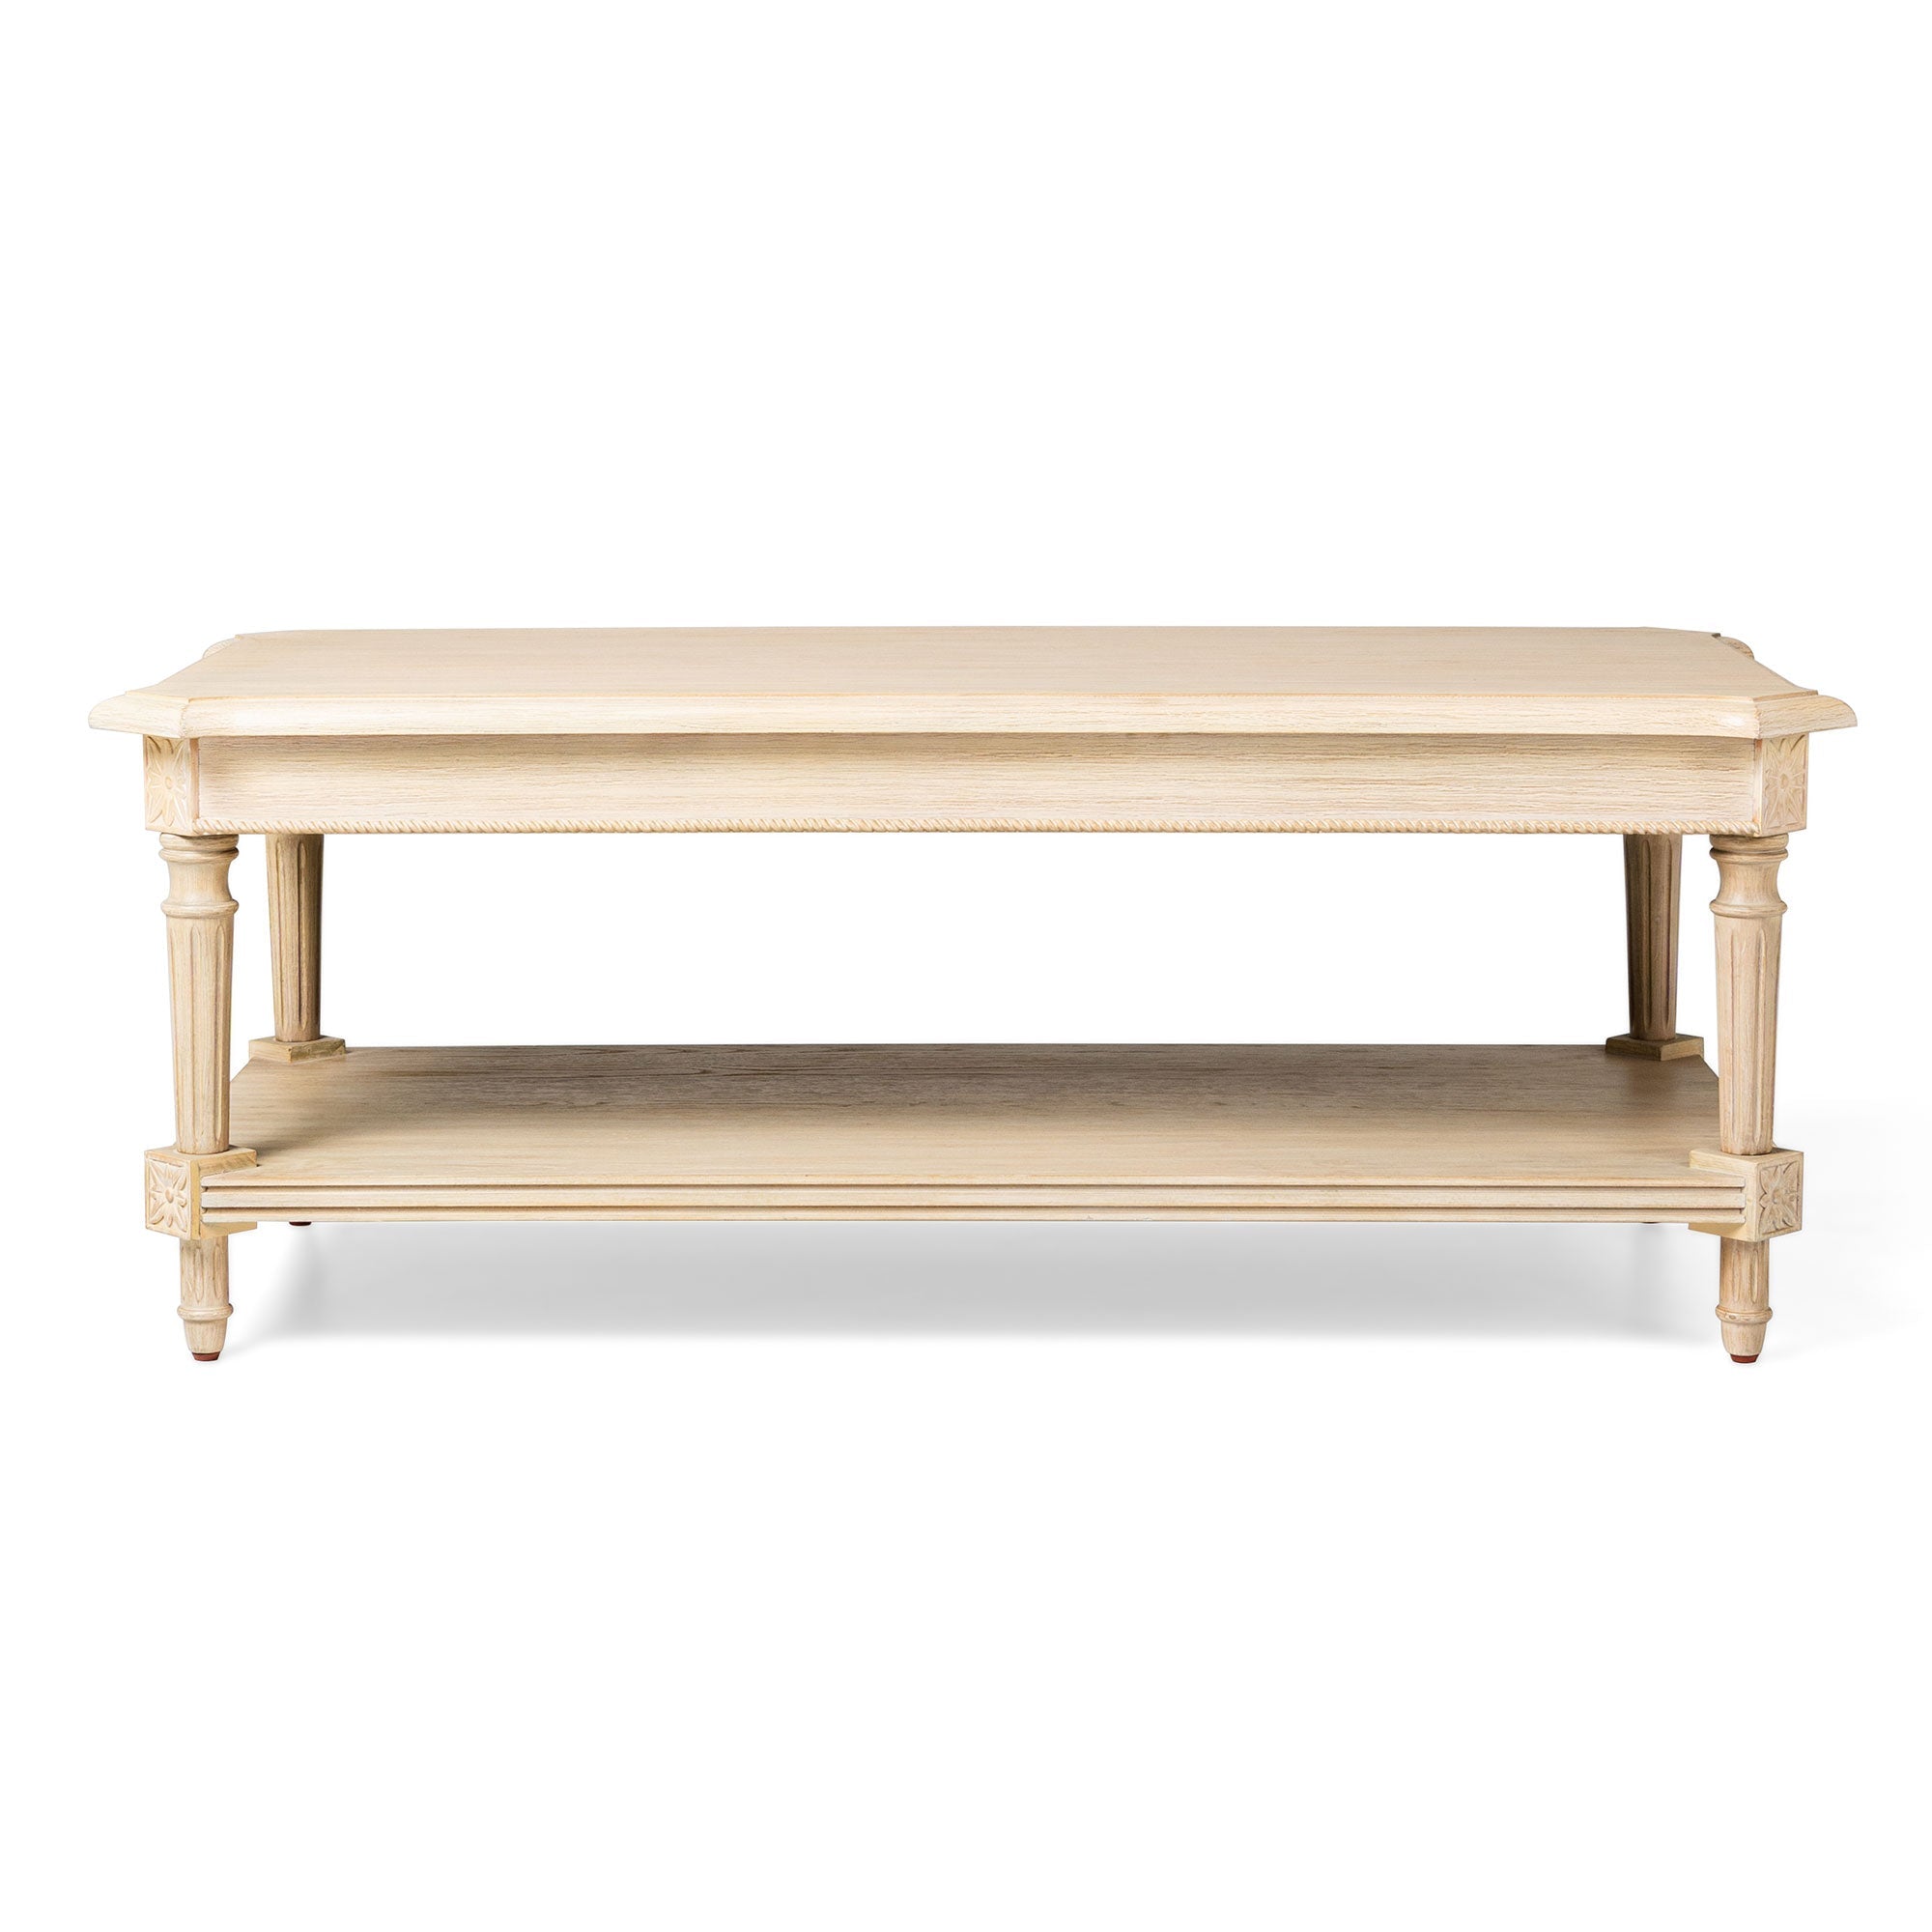 Pullman Traditional Rectangular Wooden Coffee Table in Antiqued White Finish in Accent Tables by Maven Lane